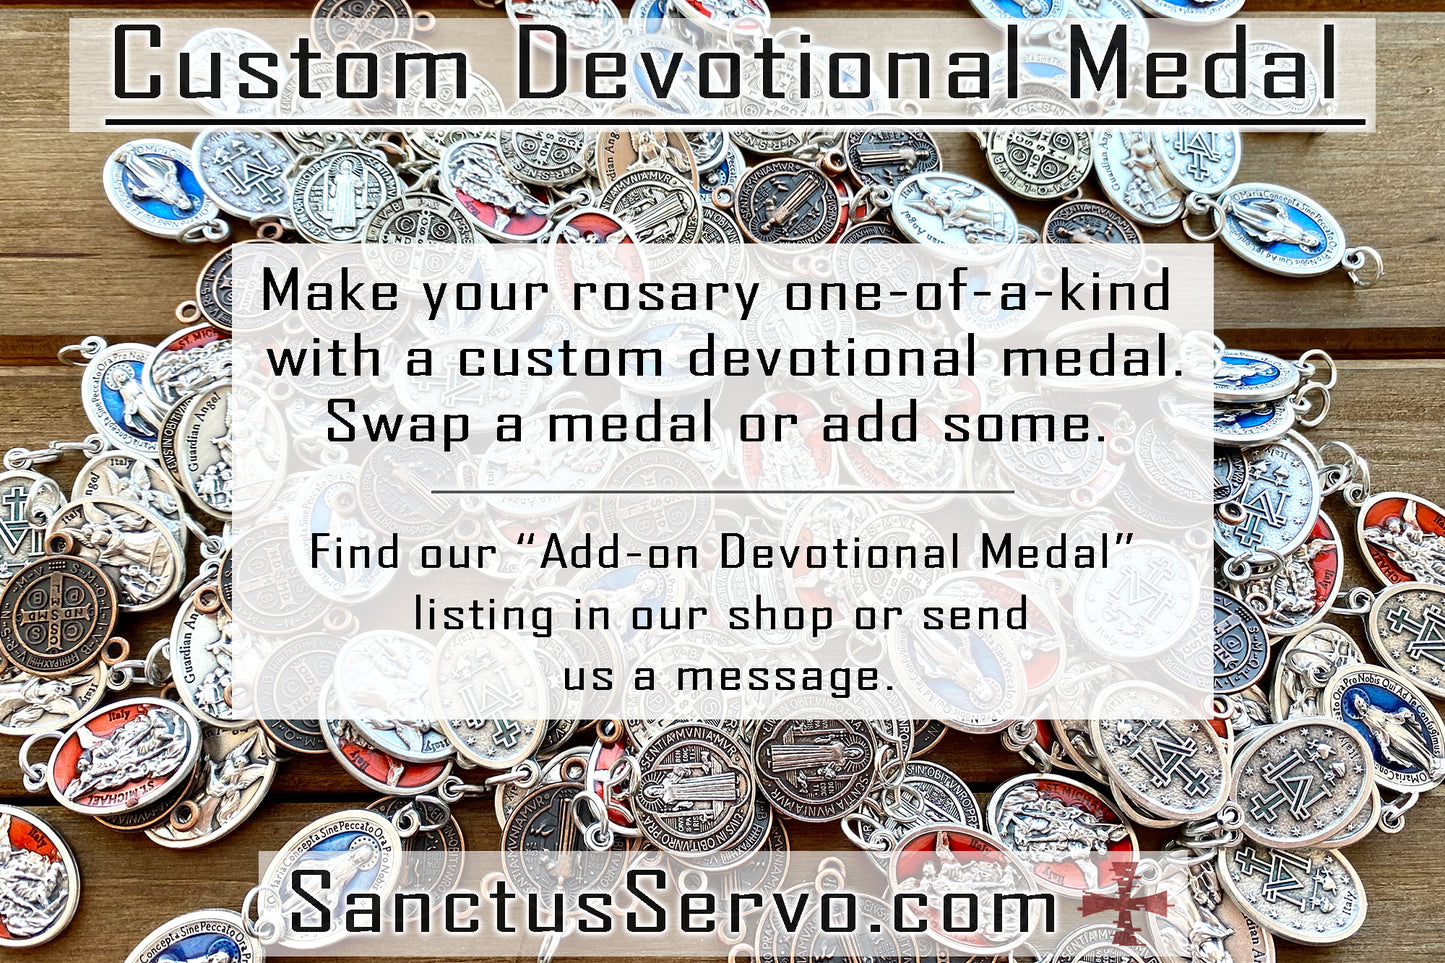 A custom devotional medal can be purchased from Sanctus Servo and added to any rosary that they sell in their shop.